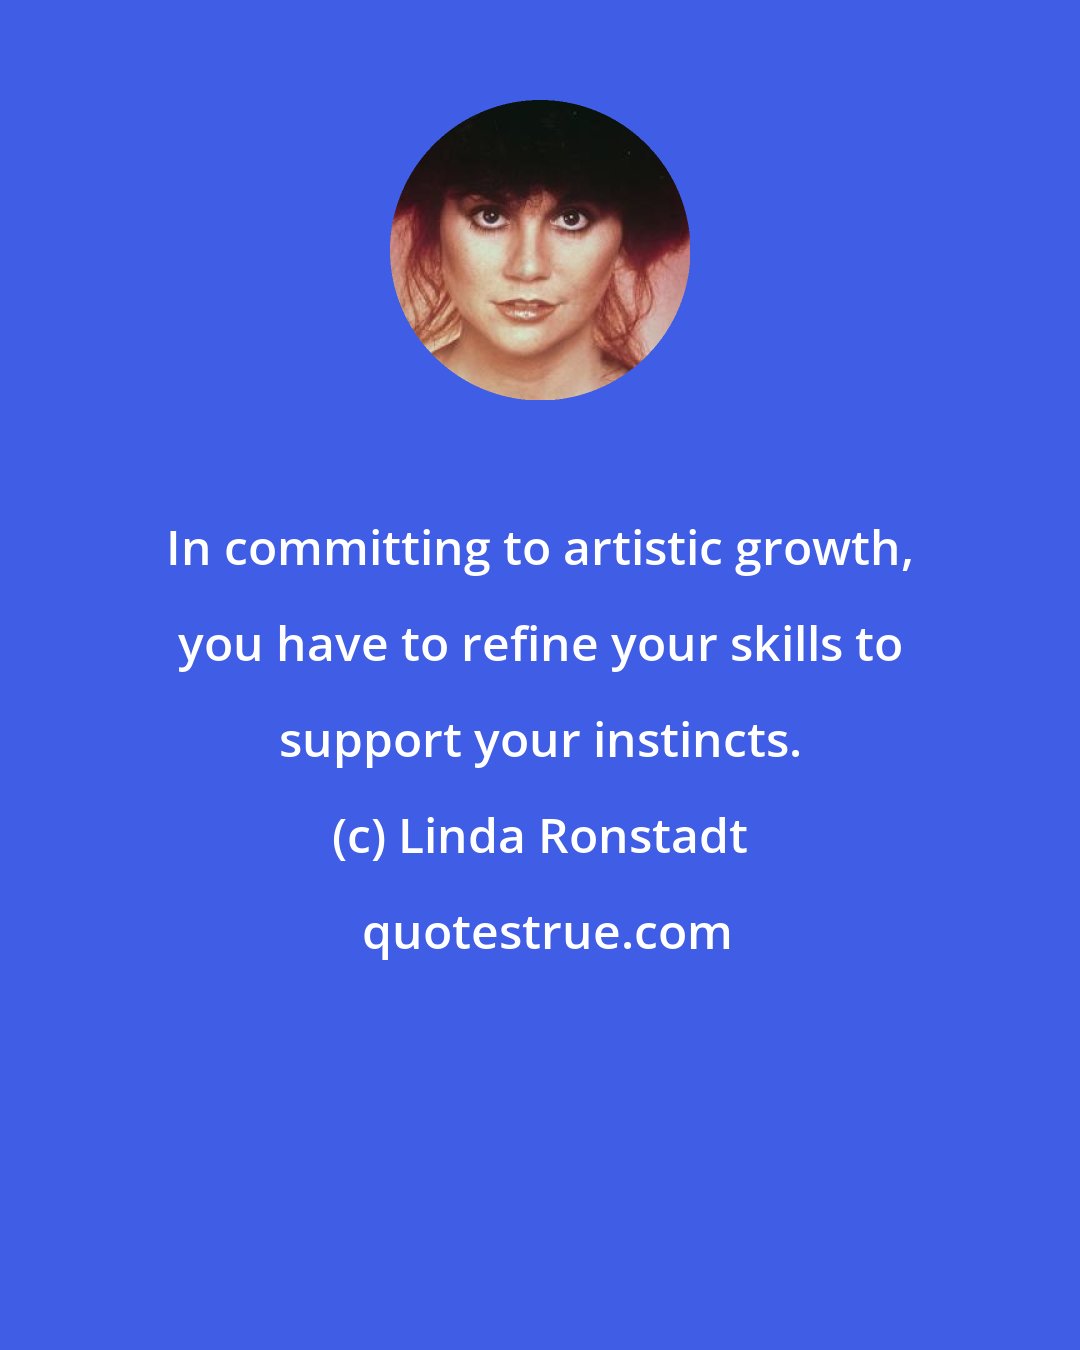 Linda Ronstadt: In committing to artistic growth, you have to refine your skills to support your instincts.